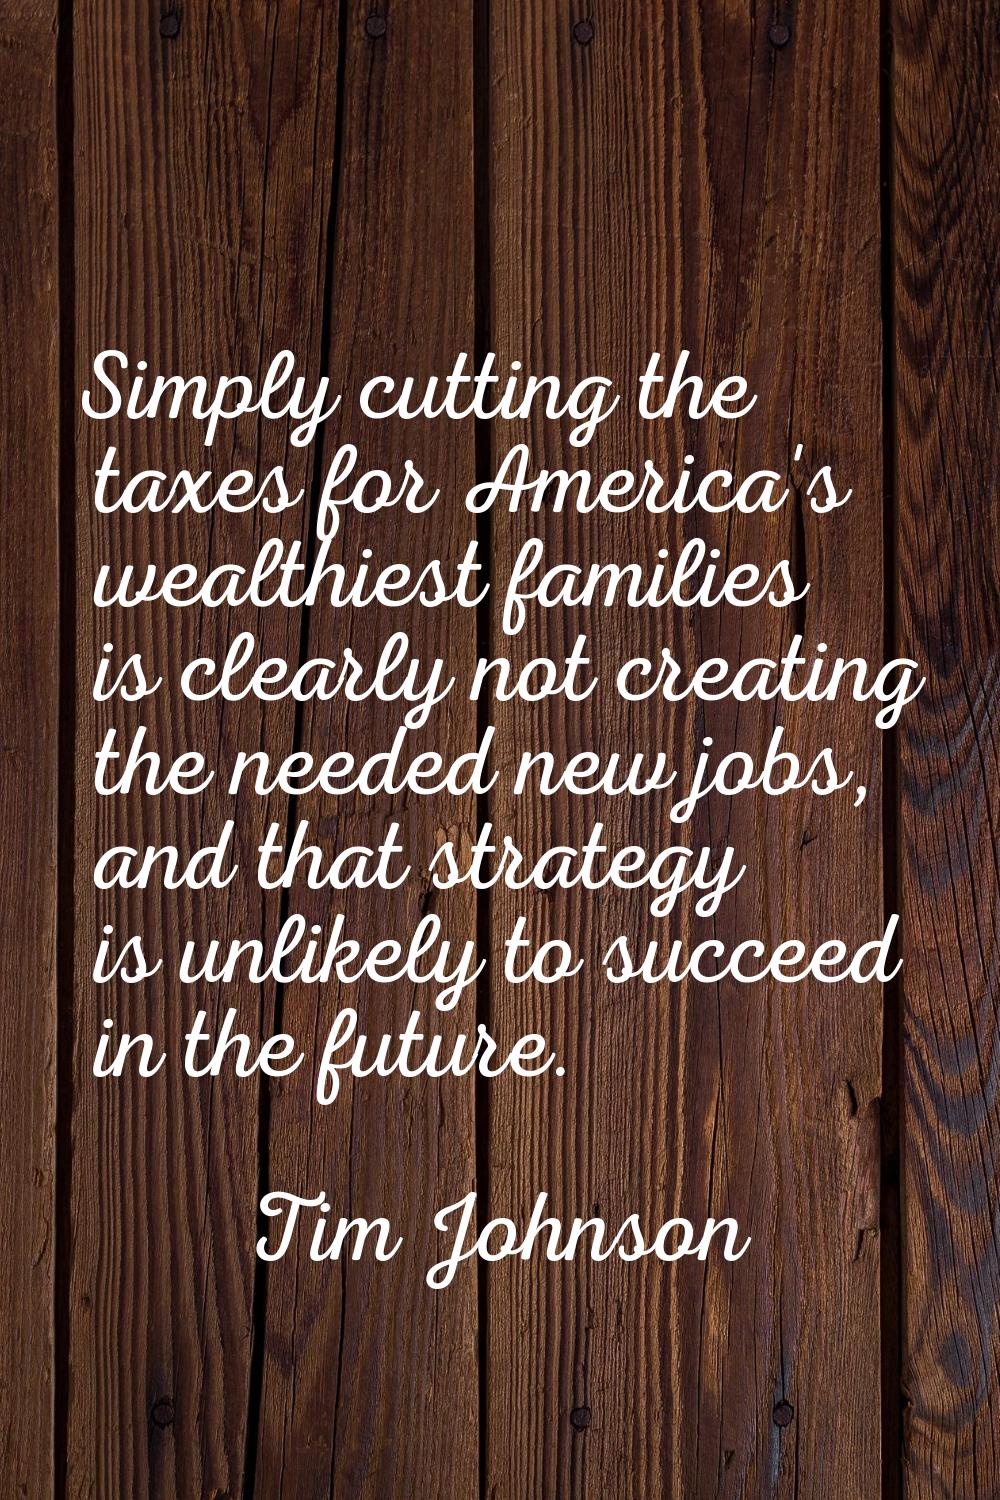 Simply cutting the taxes for America's wealthiest families is clearly not creating the needed new j